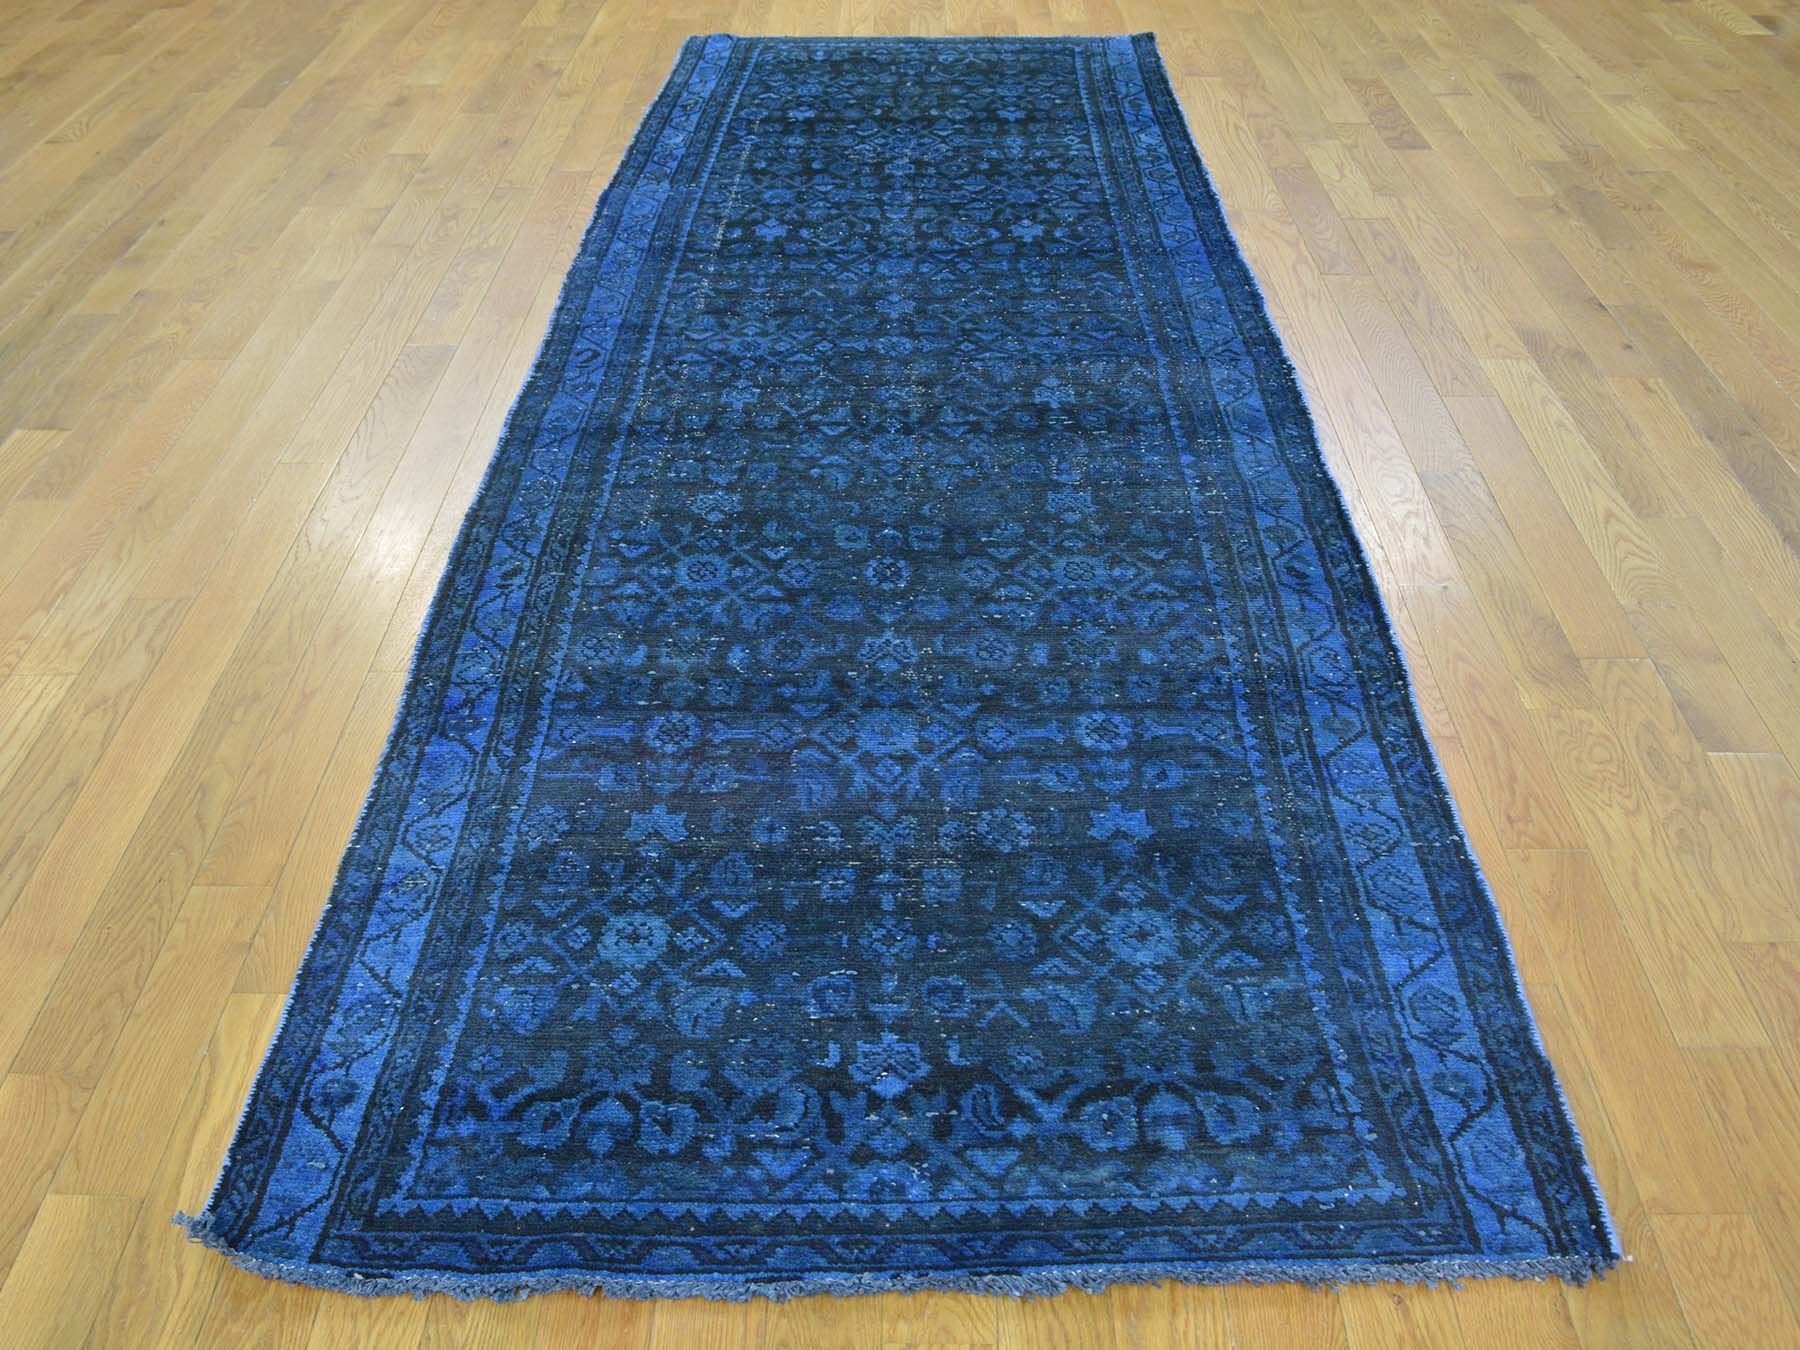 Blue Rug Runners Rugs Ideas With Hallway Runners Blue (View 8 of 20)